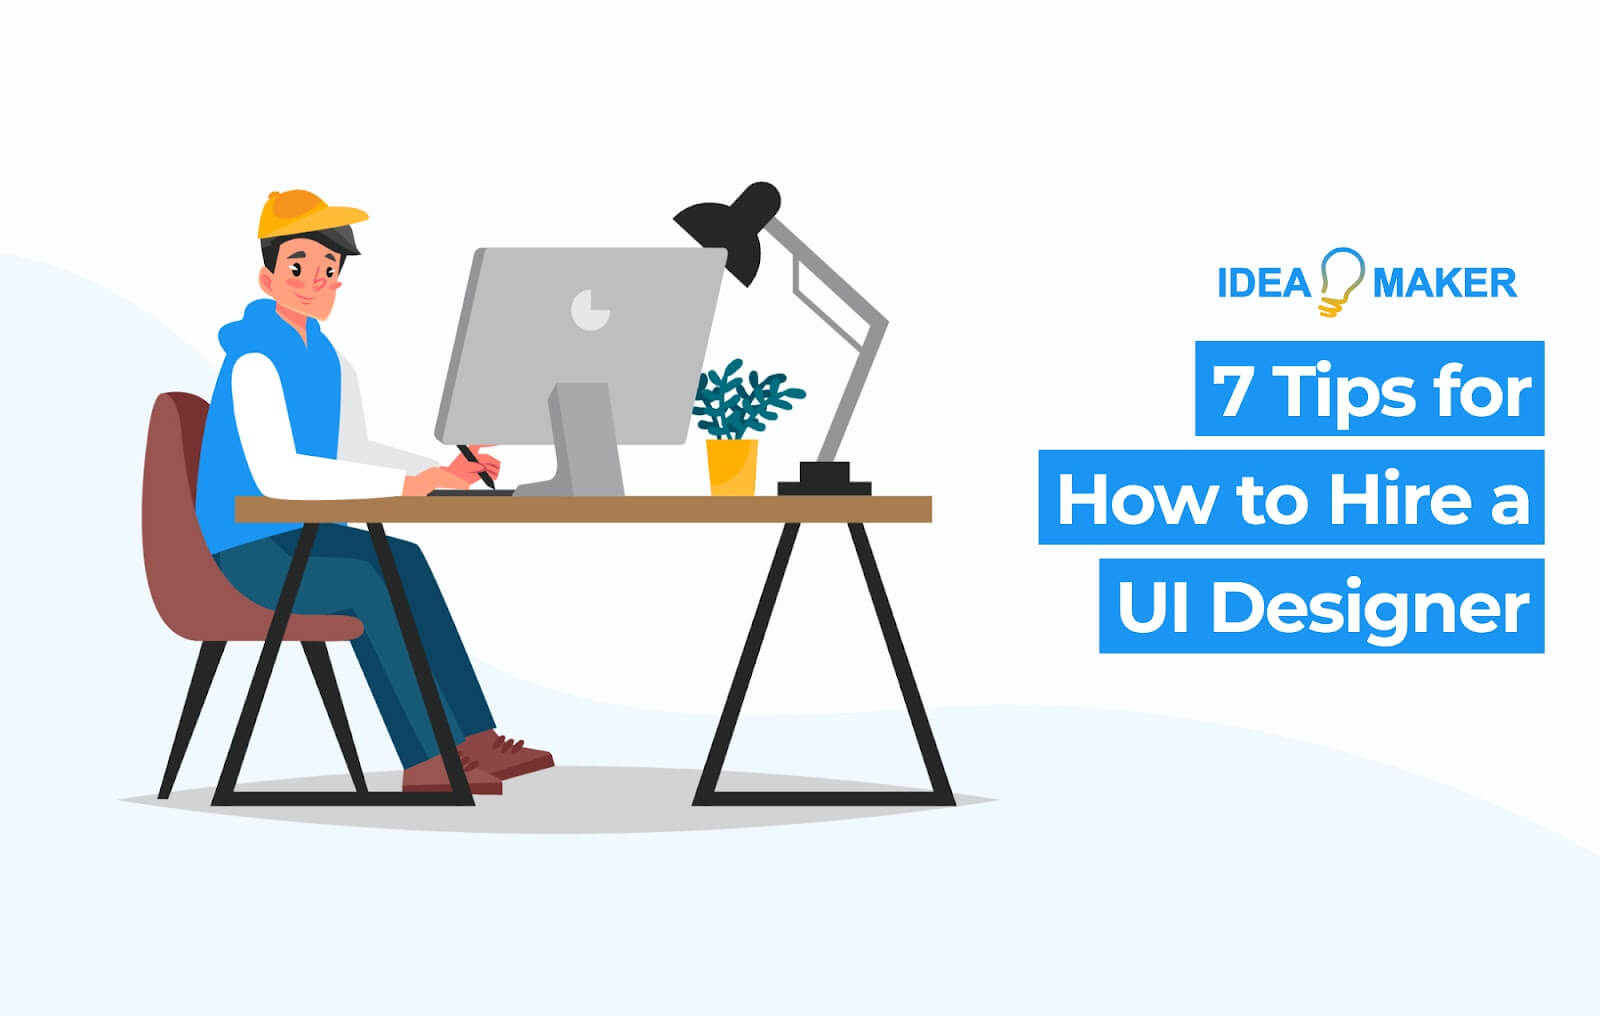 7 Tips for How to Hire a UI Designer - 1